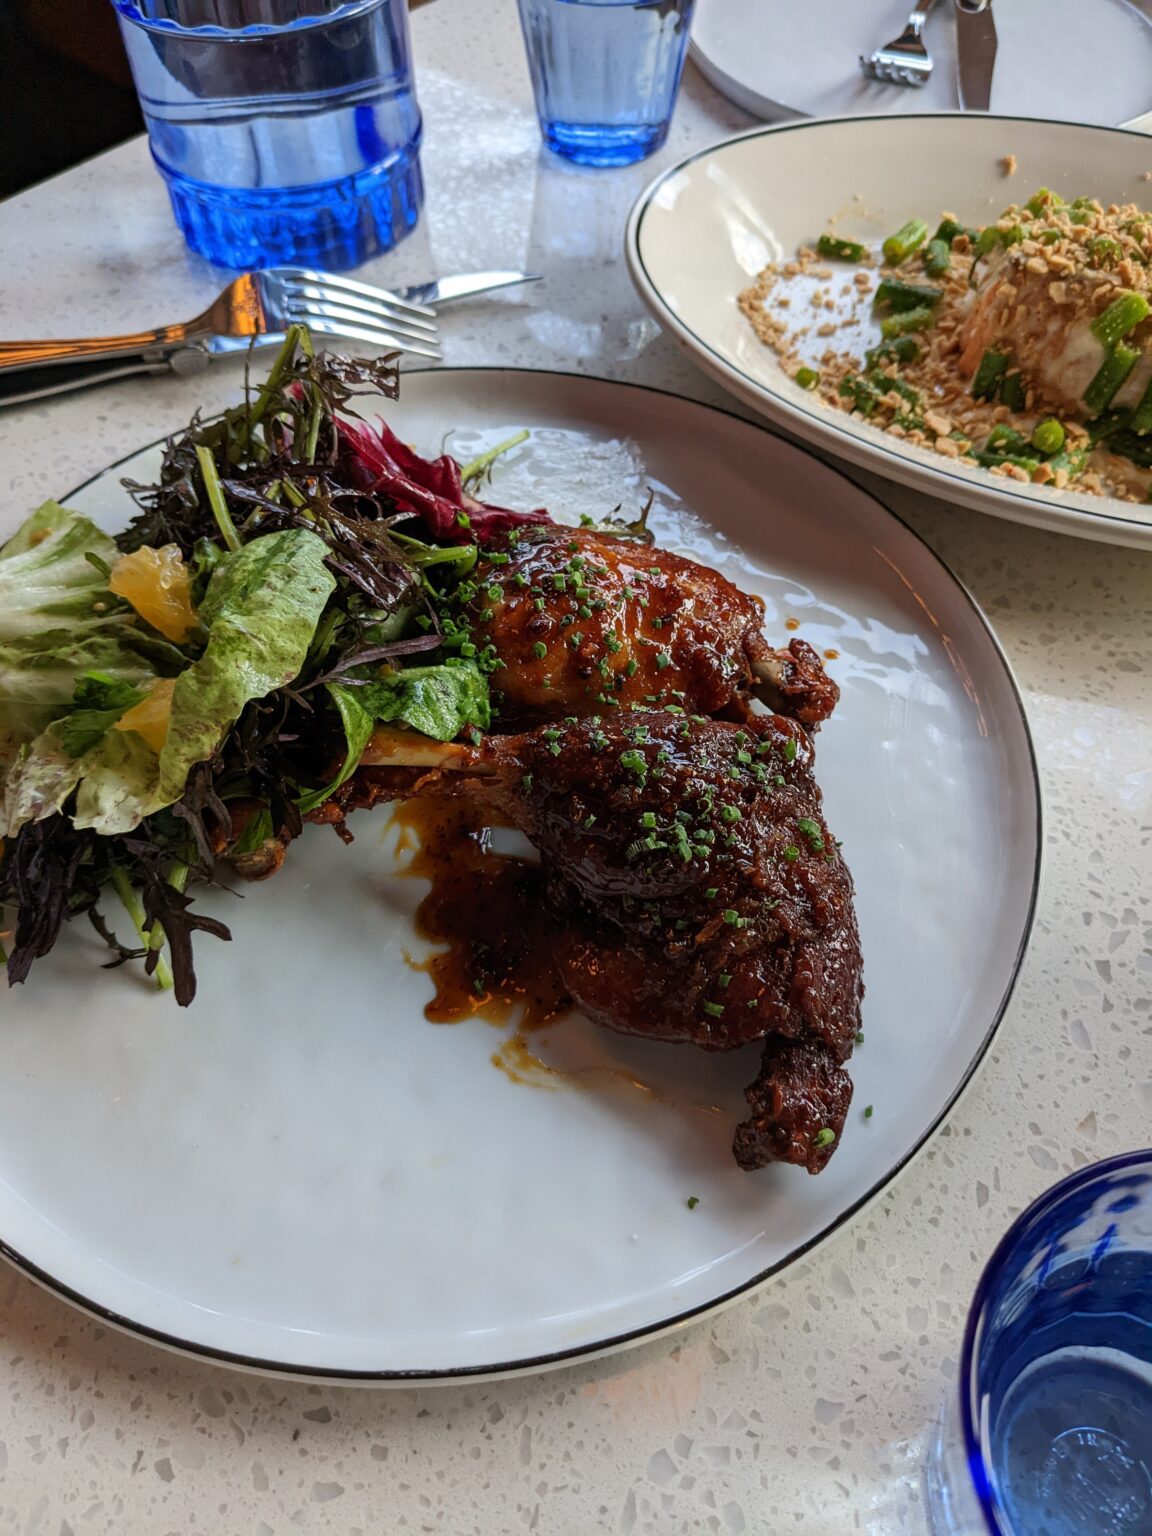 Among the many remarkable dishes at Estelle — a new French bistro and bar in Fairhaven — is the duck confit. The skin is crisped and the whole duck quarter is served with a sweet-and-sour orange gastrique sauce. Radicchio salad is served on the side.